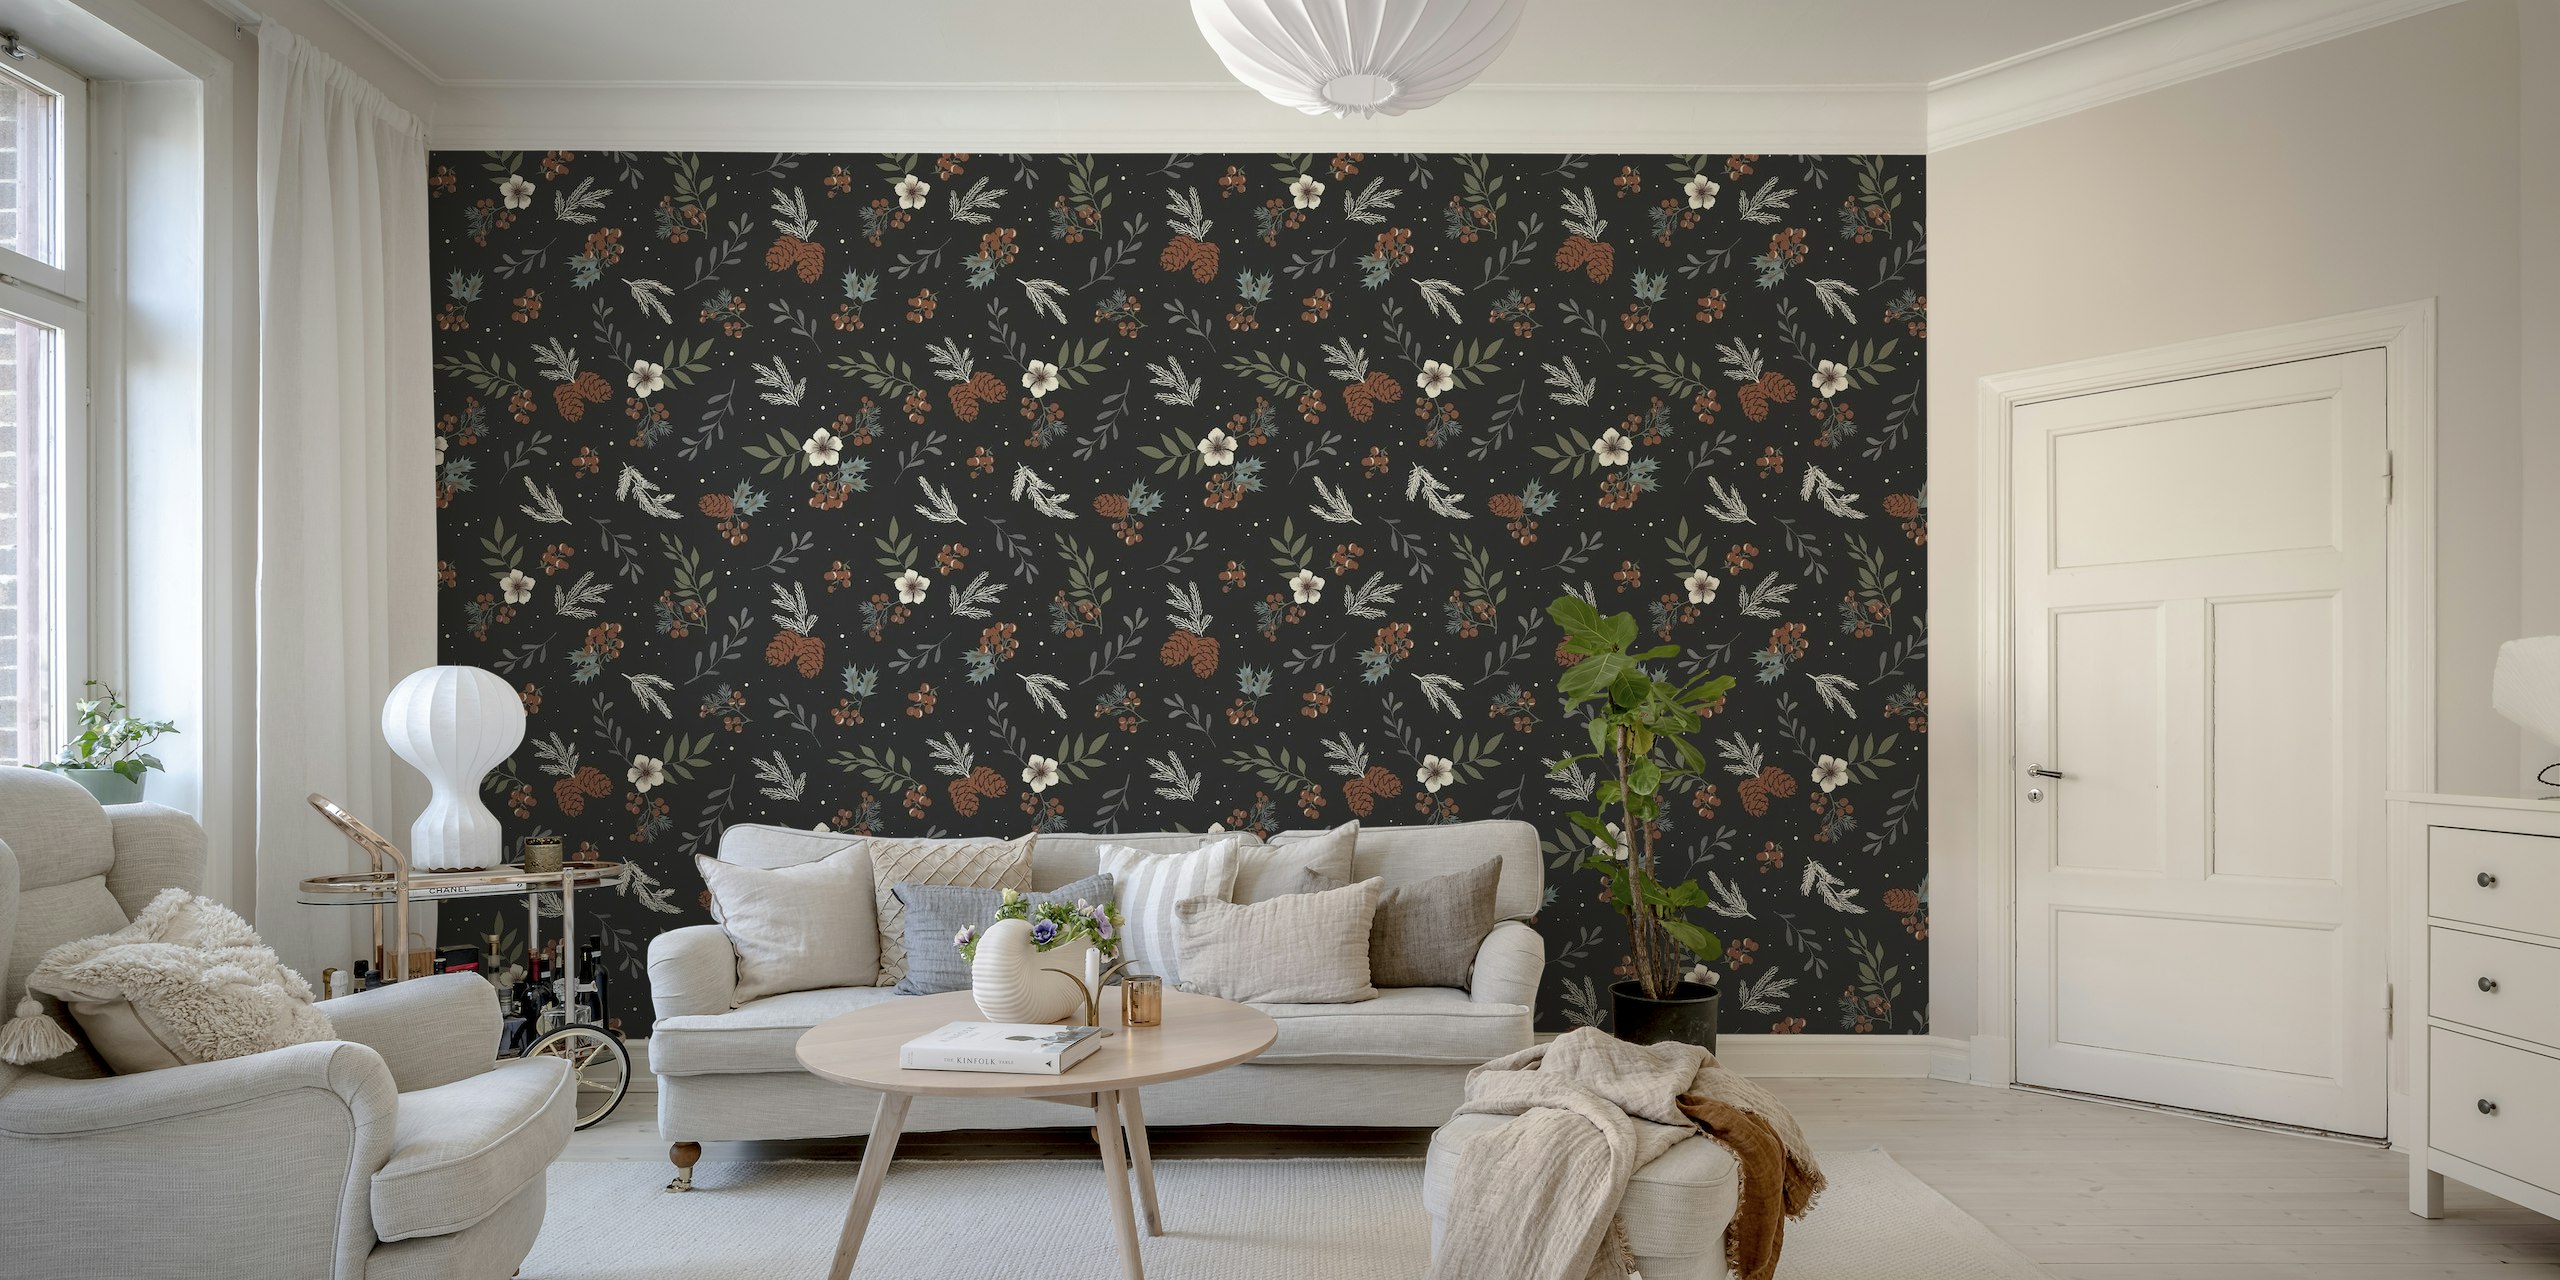 Winter-inspired wall mural with pine branches, holly berries, and flowers on a dark background